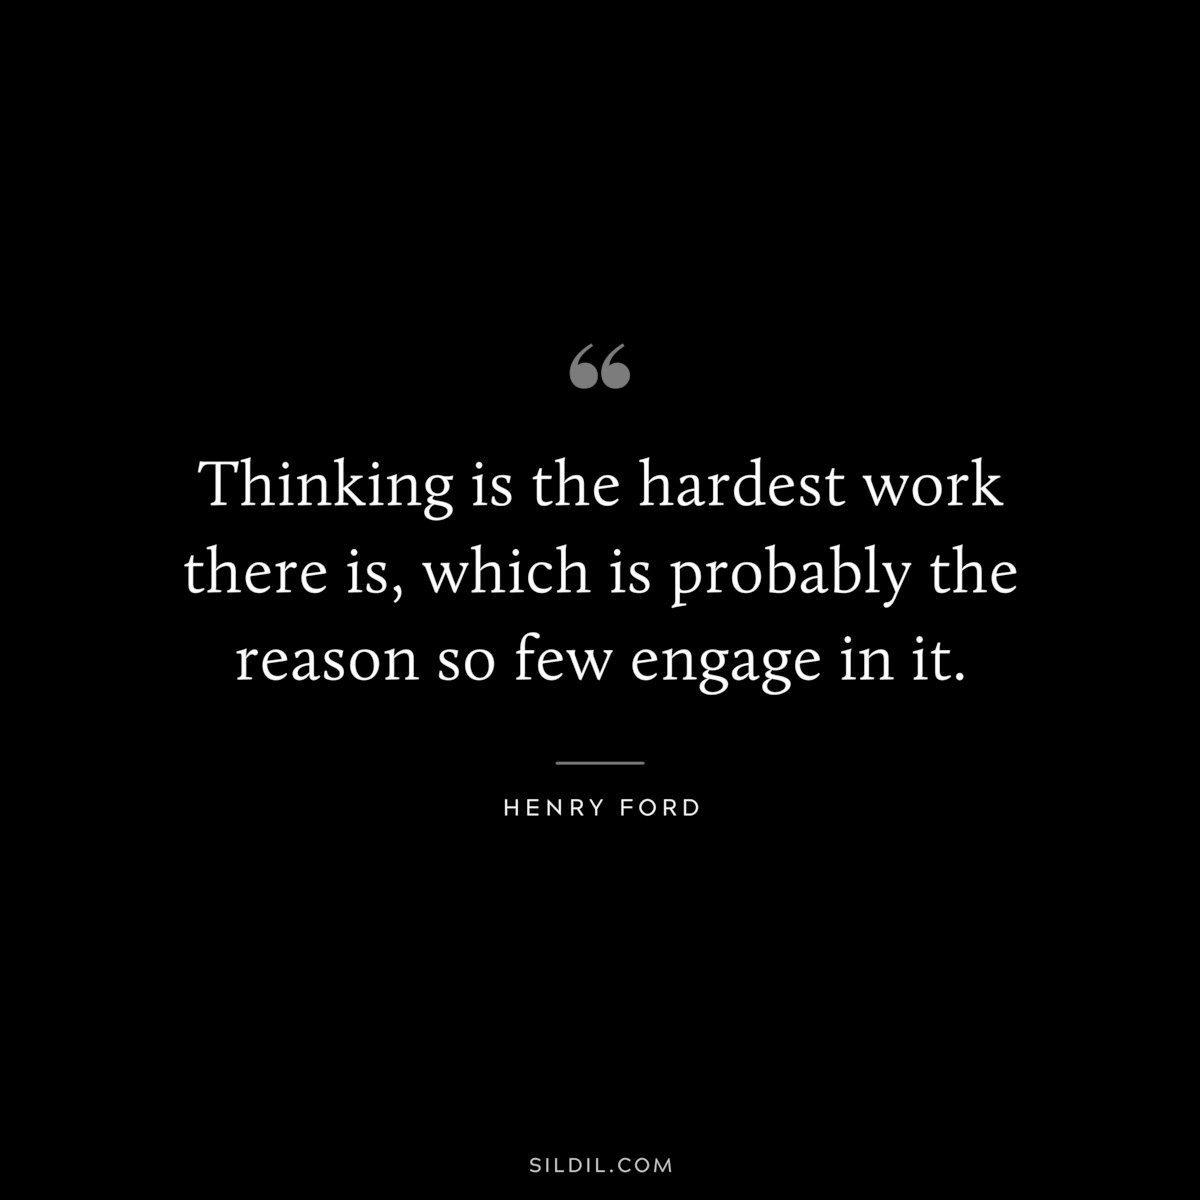 Thinking is the hardest work there is, which is probably the reason so few engage in it. ― Henry Ford